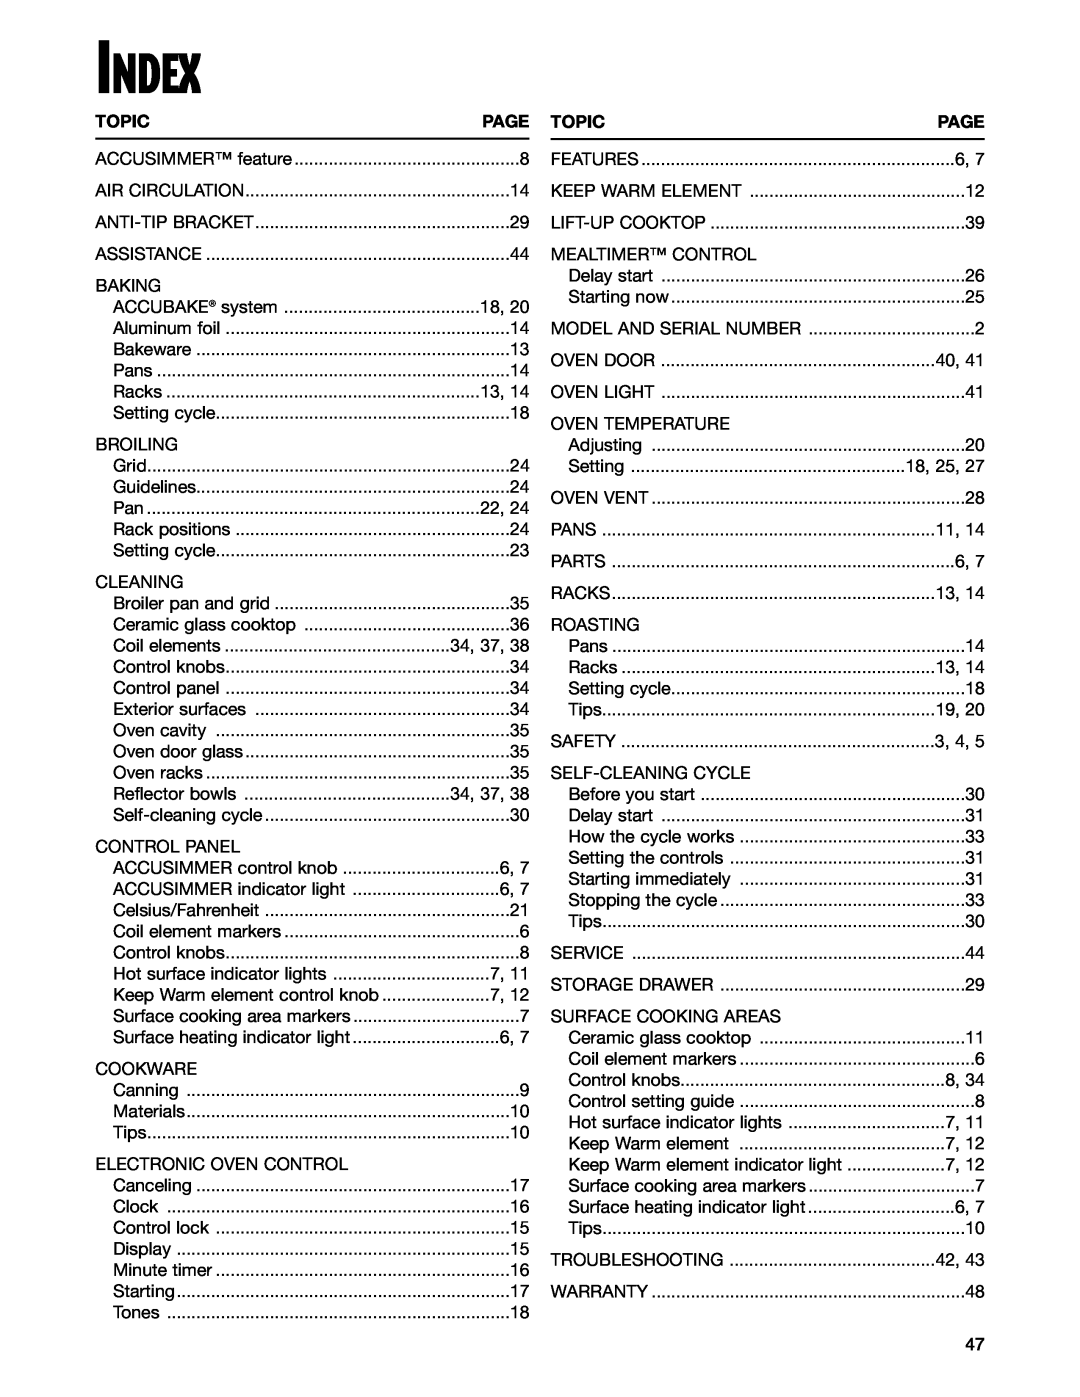 Whirlpool GR399LXG warranty Index, Topic, Page 